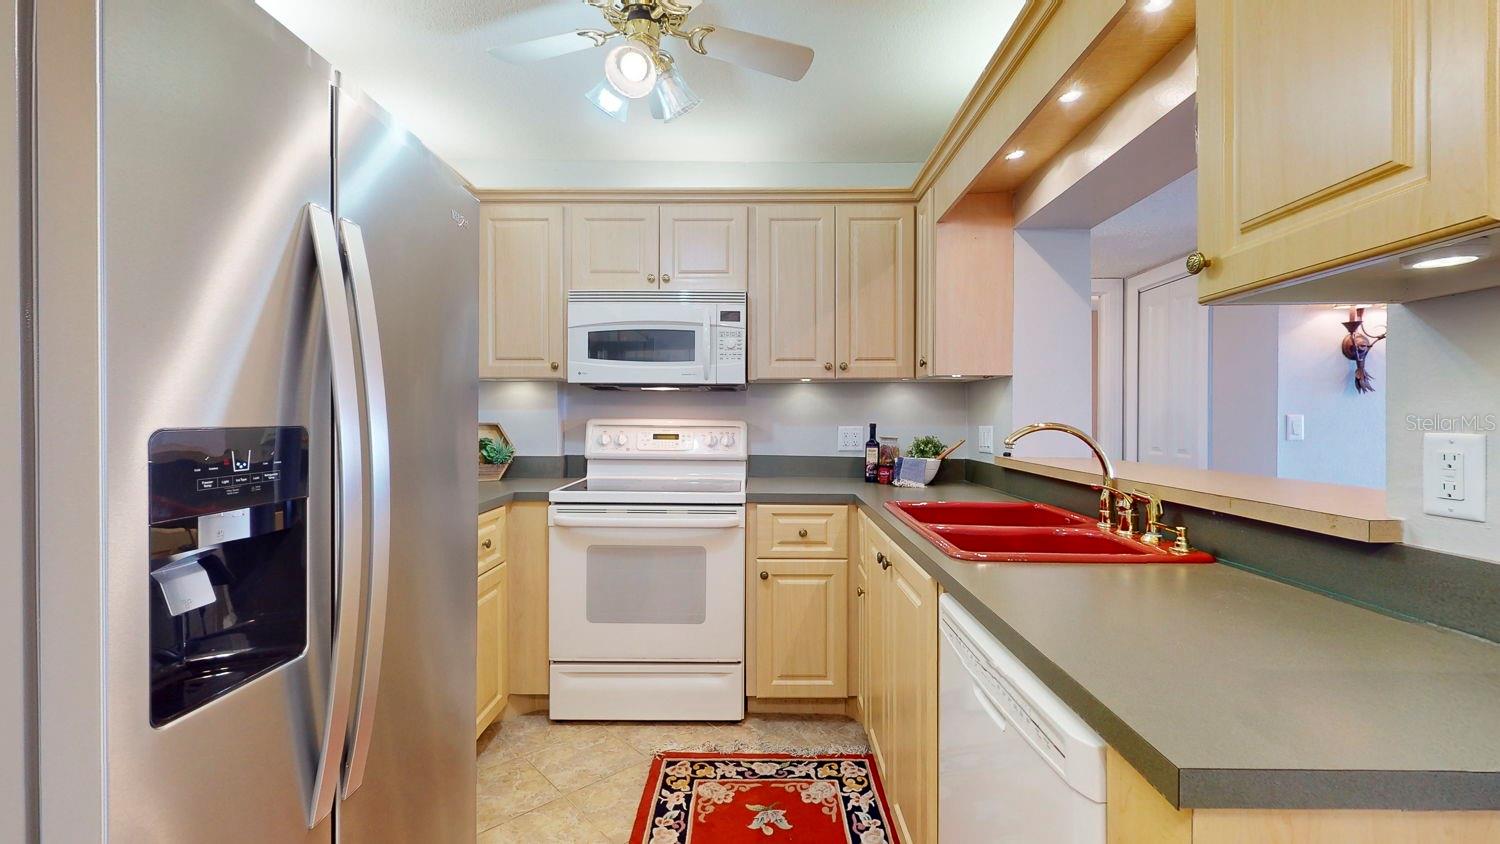 spacious and beautifully well lit kitchen with new stailness refrigerator